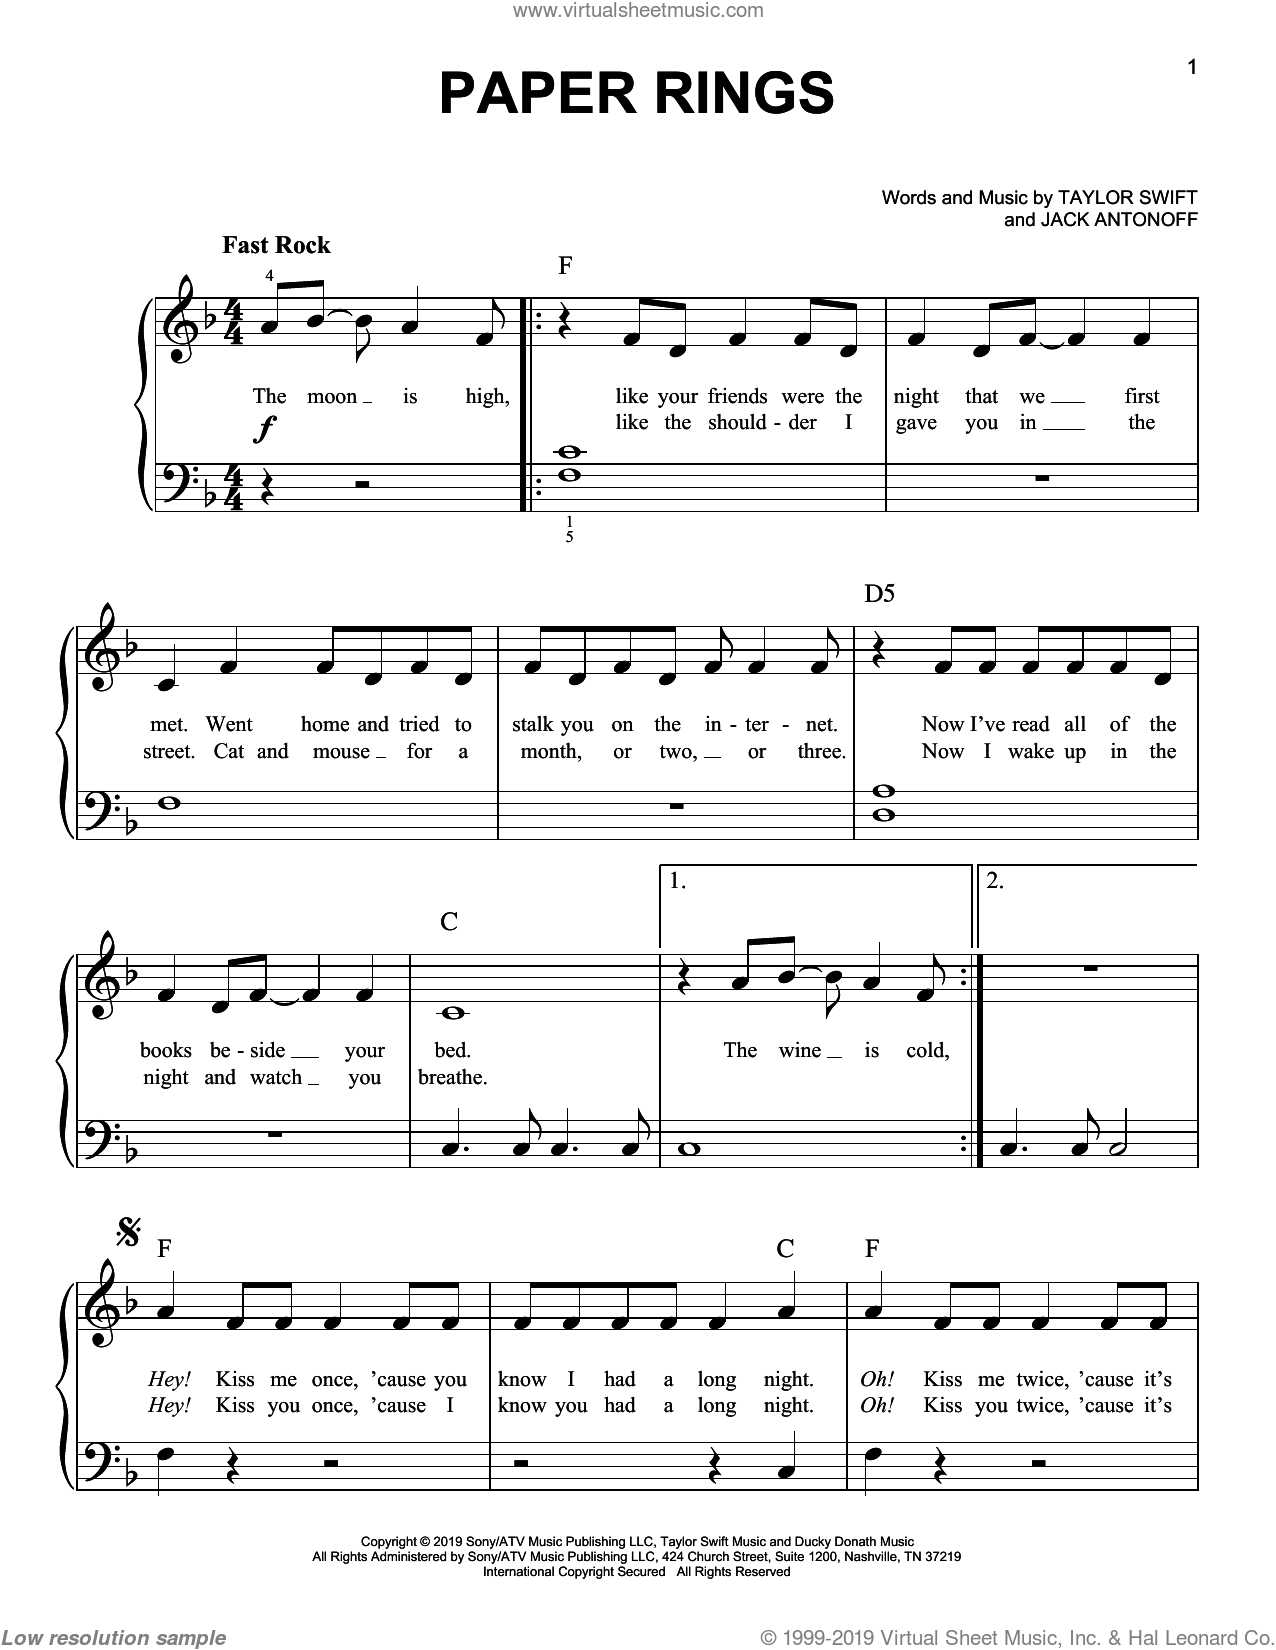 Paper Rings sheet music for piano solo (PDF-interactive)